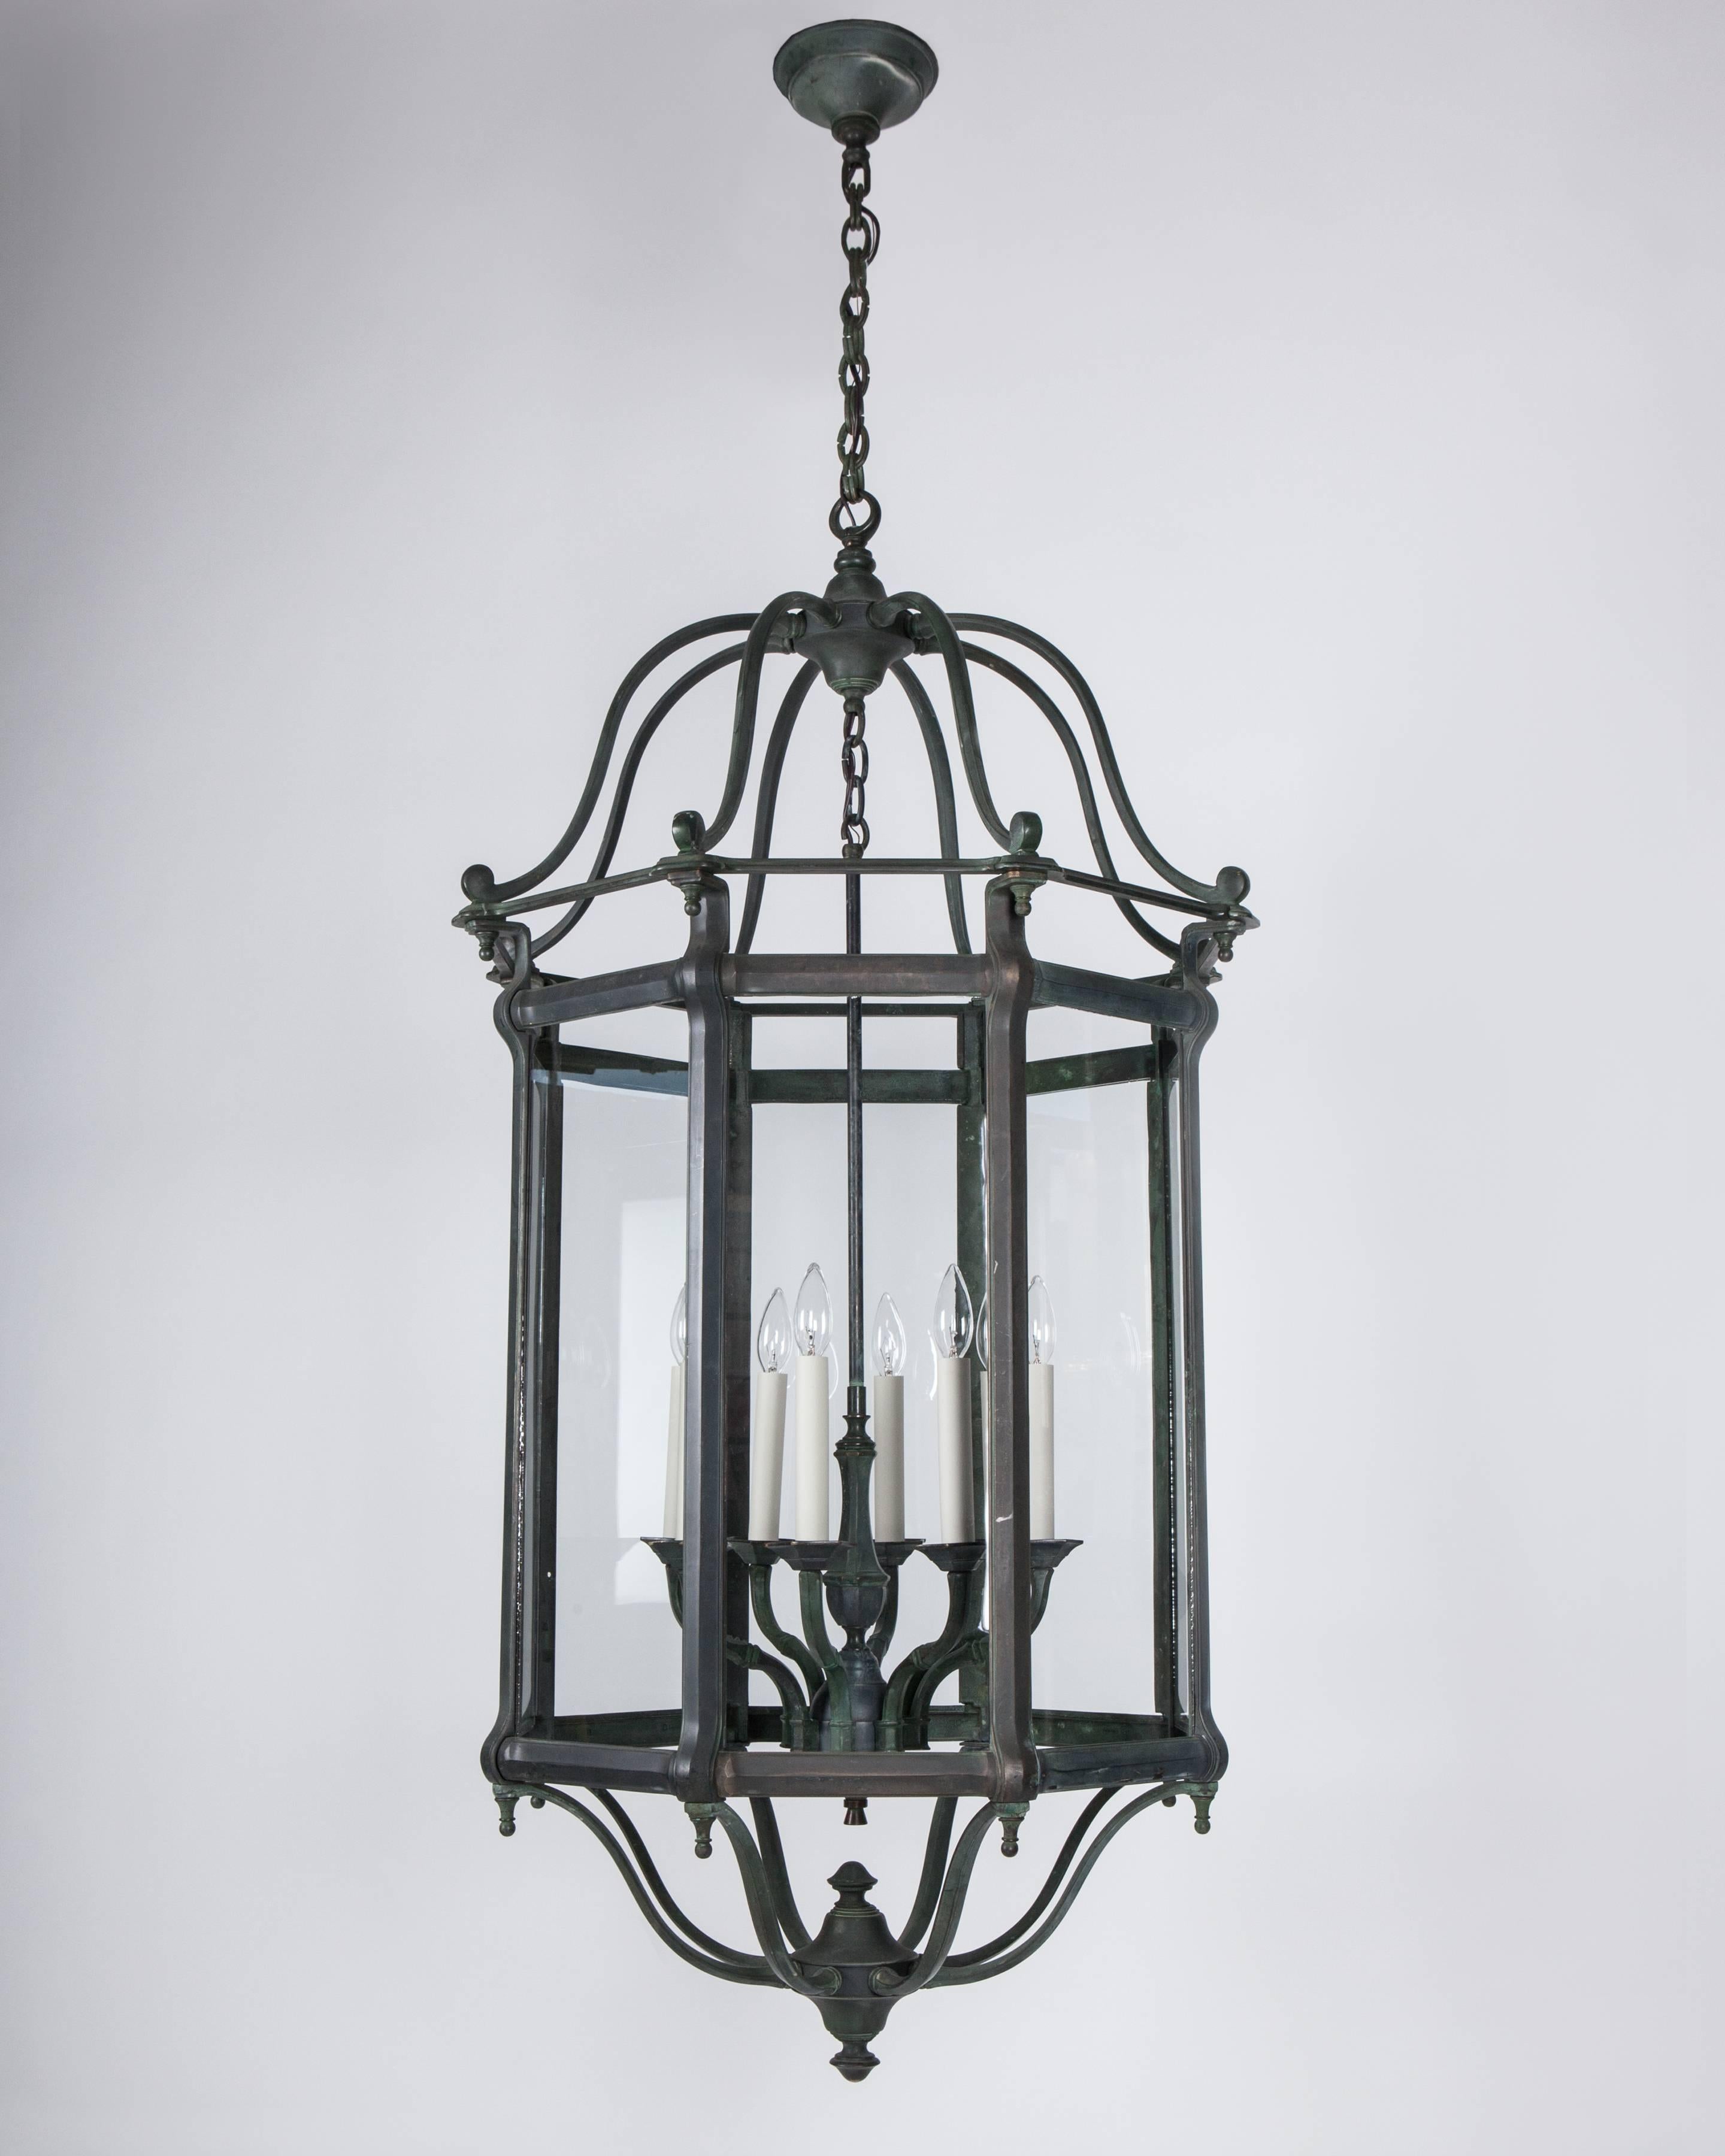 AHL4030
A large bronze octagonal lantern in its original verdigris finish with cast mullions holding clear glass panels surrounding an eight-light candelabra cluster.

Dimensions:
Current height: 123